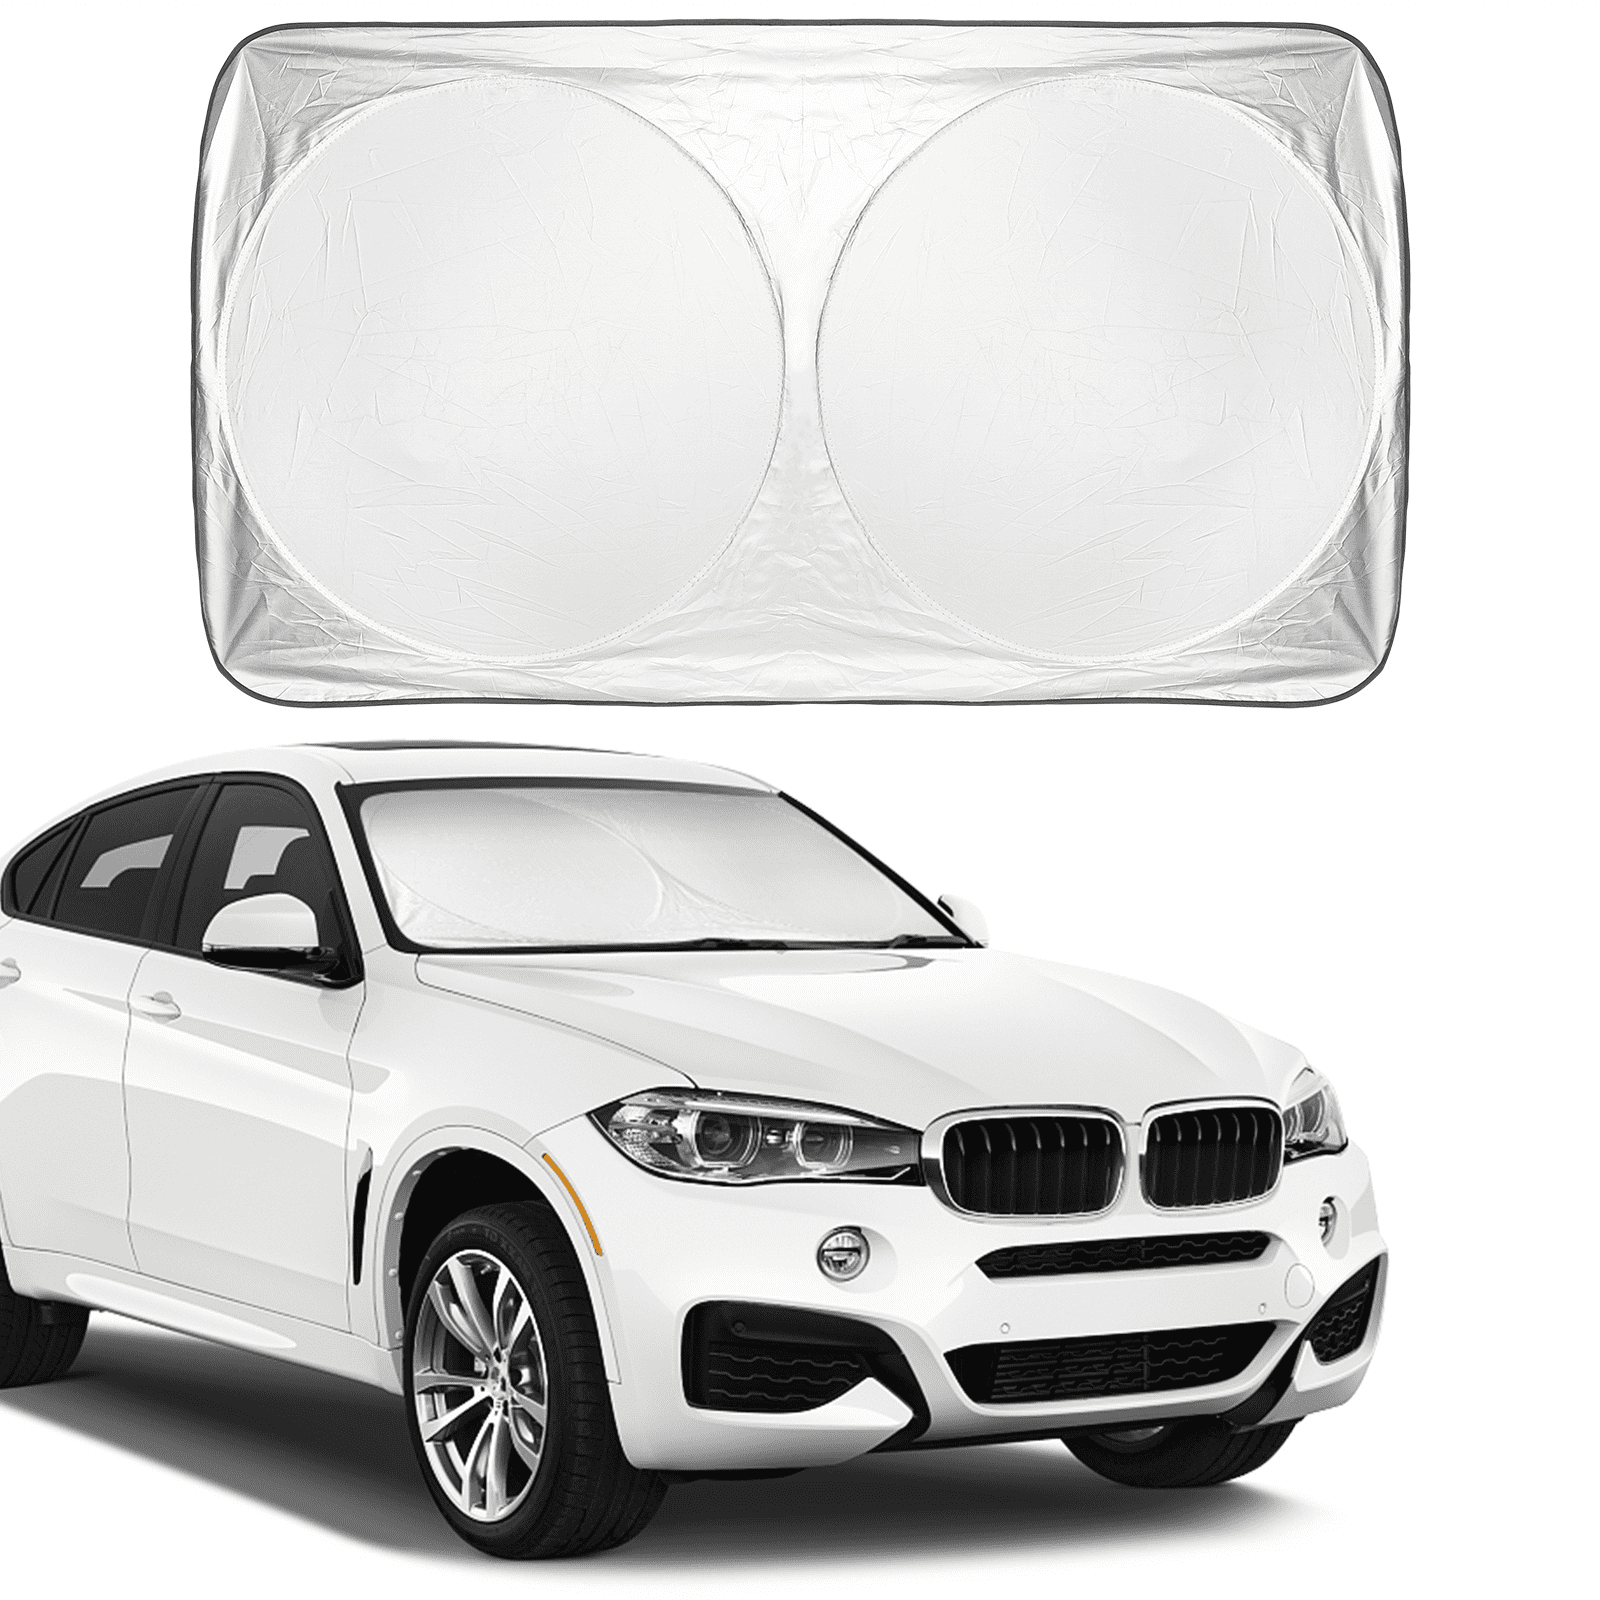 HBFF Army Airborne Rangers Windshield Sun Shade ~Universal Fit Car Sun Shade,Keep Your Vehicle Cool ~2 Sizes 